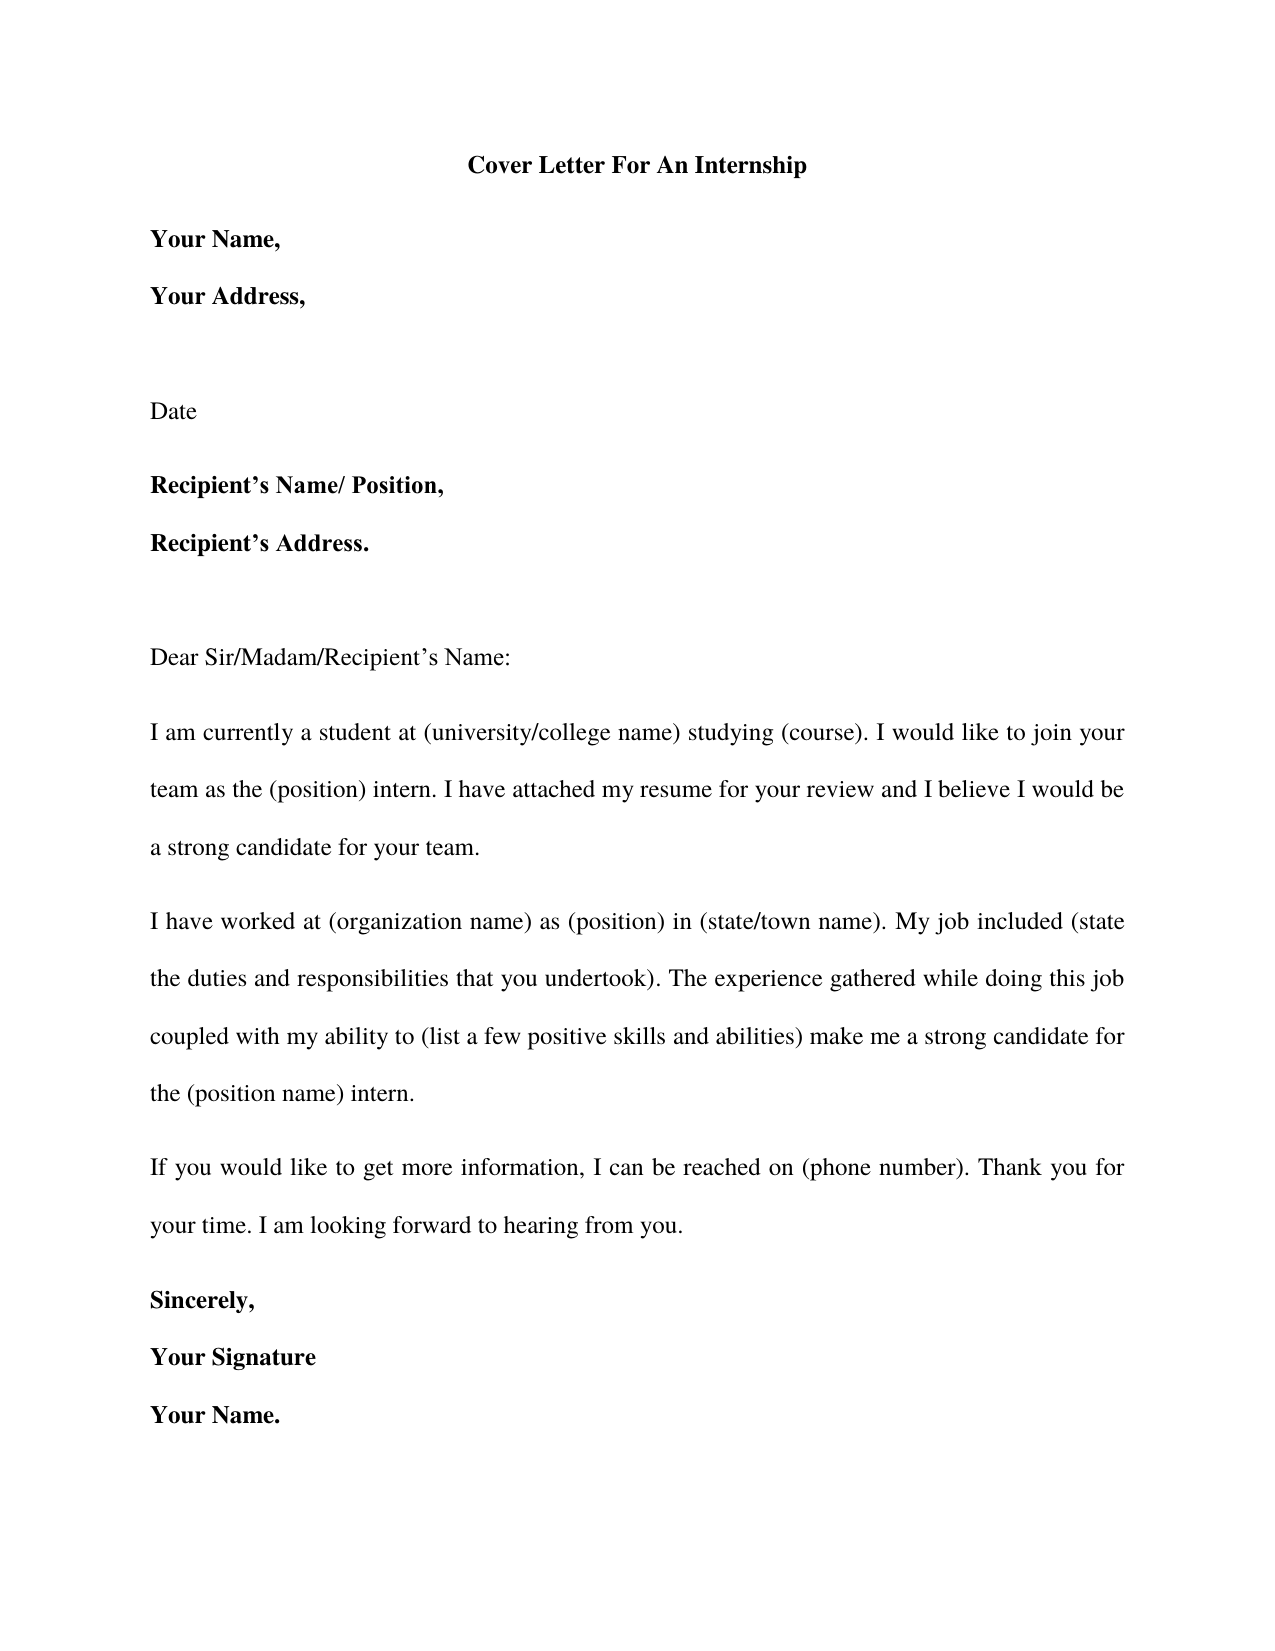 example cover letter for an internship